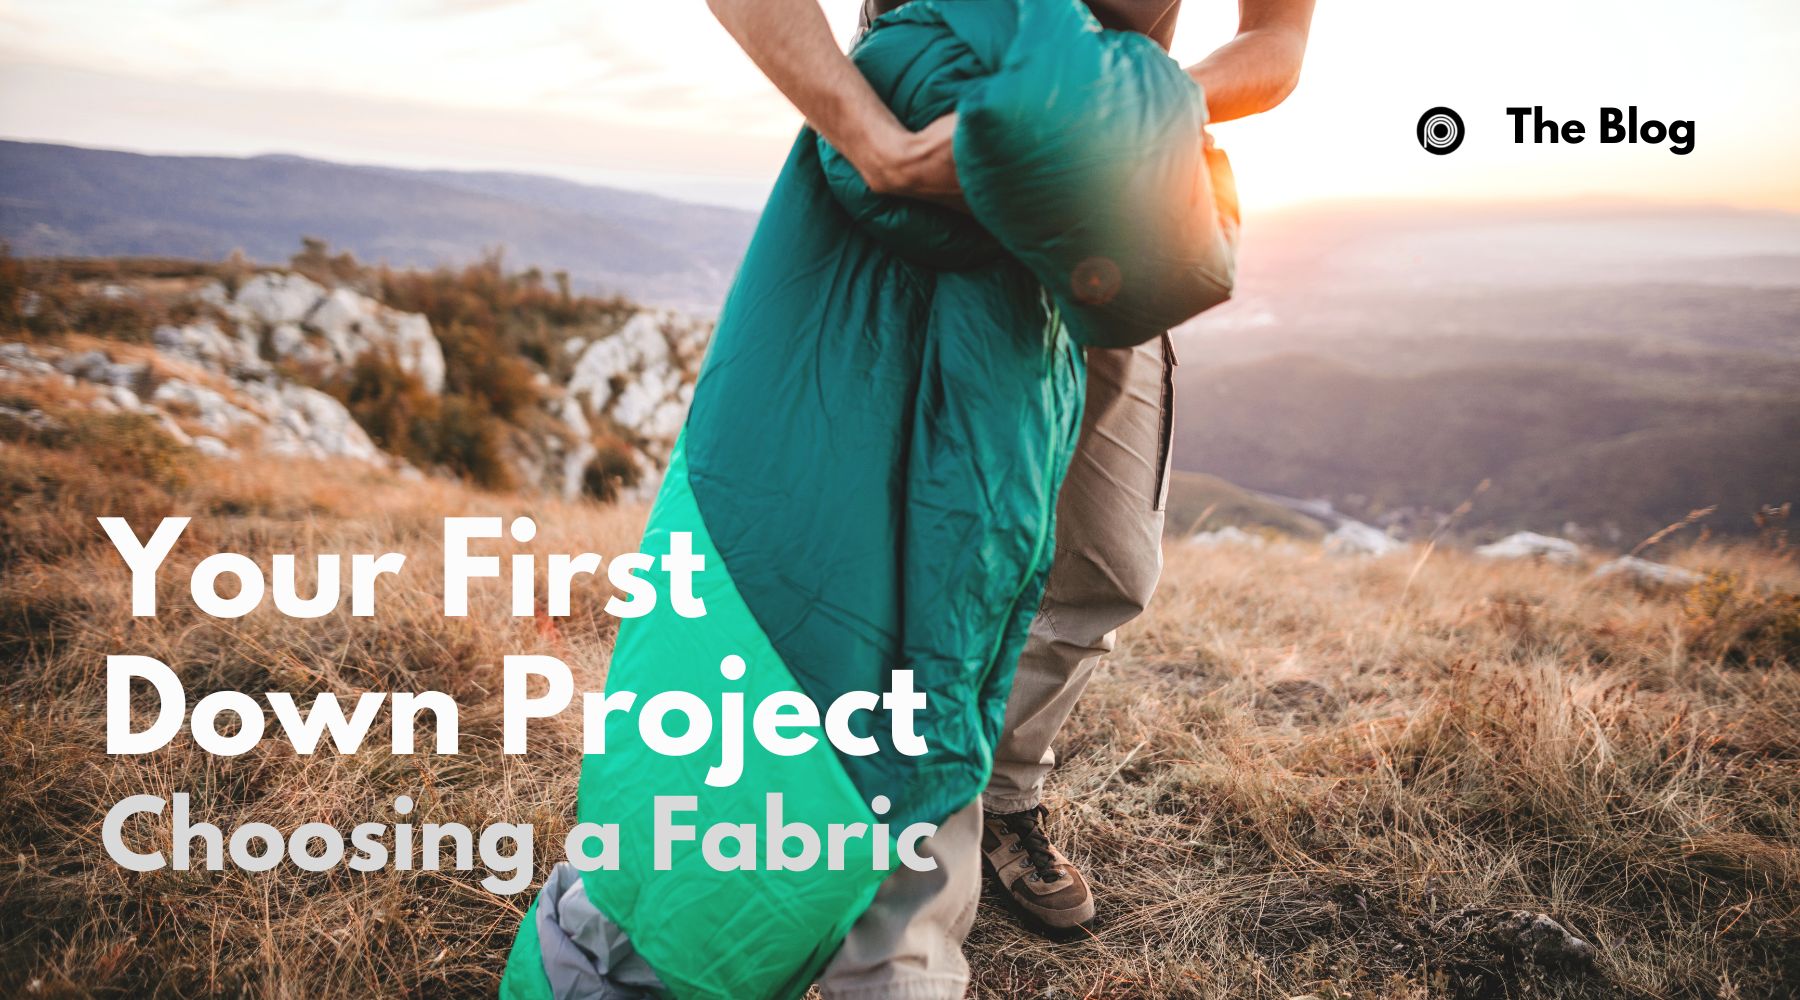 Choosing a Fabric for your first down project